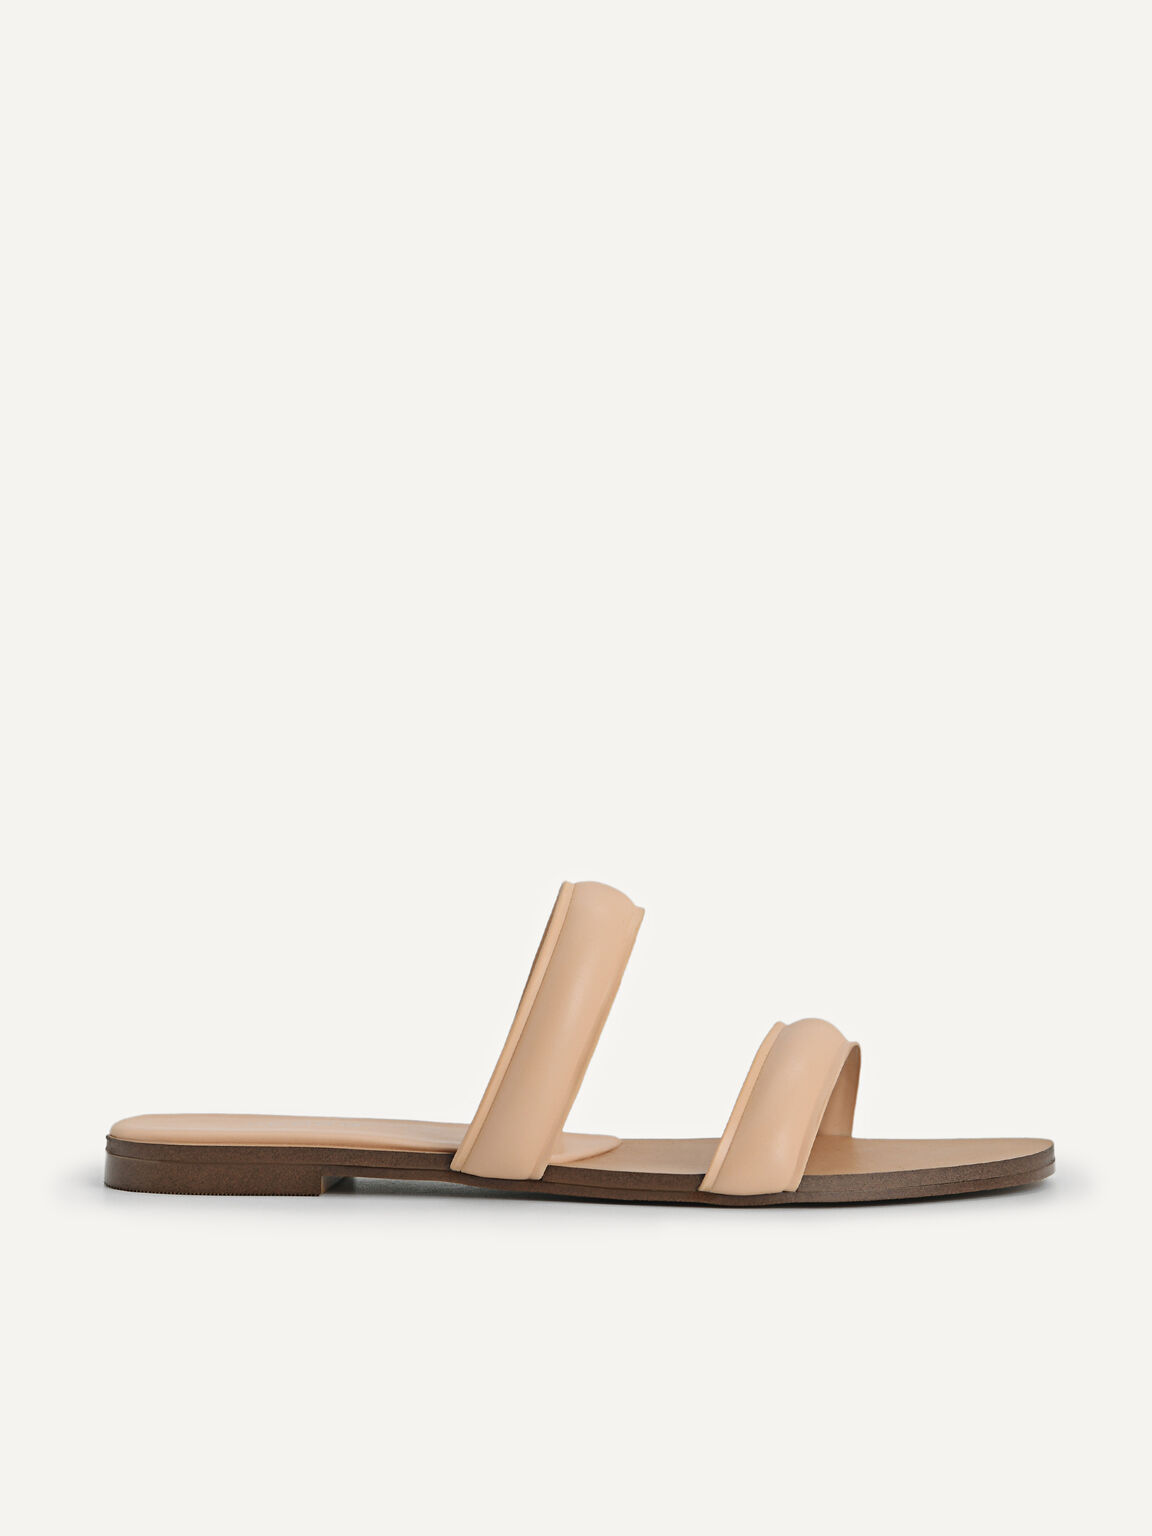 Double Strap Slip-On Sandals, Nude, hi-res